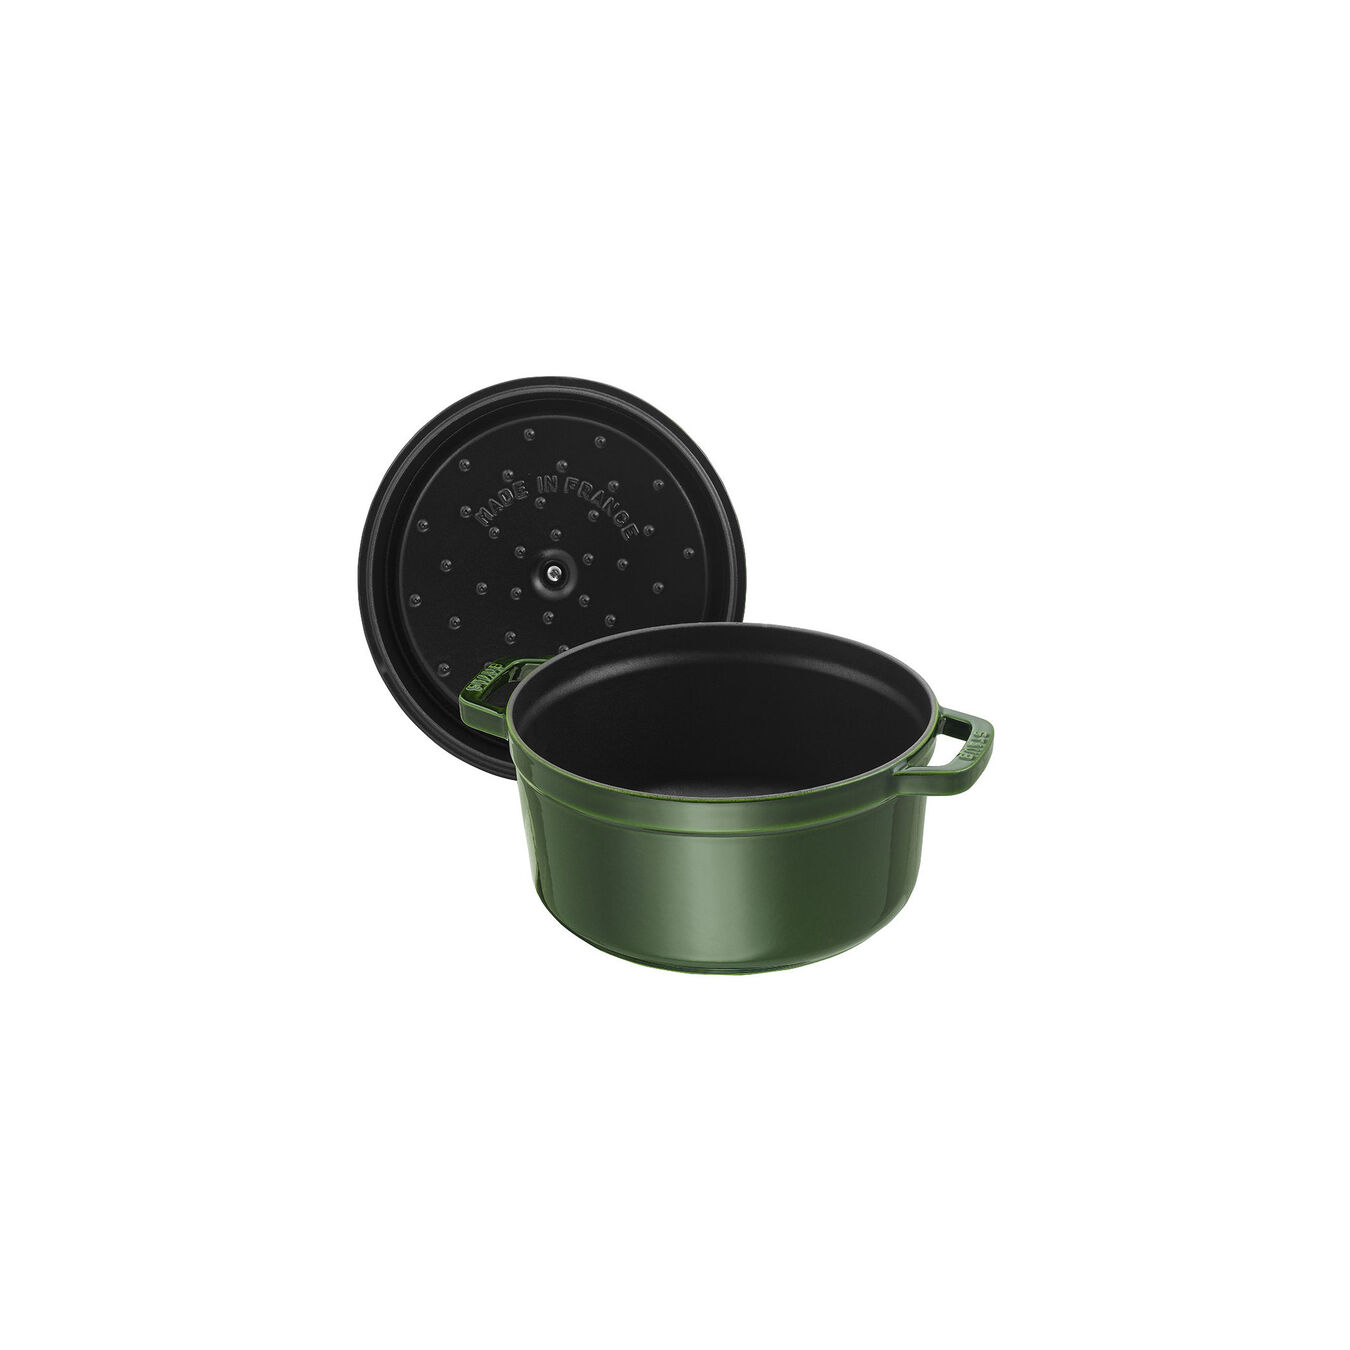 5.25 l cast iron round Cocotte, basil-green - Visual Imperfections,,large 2